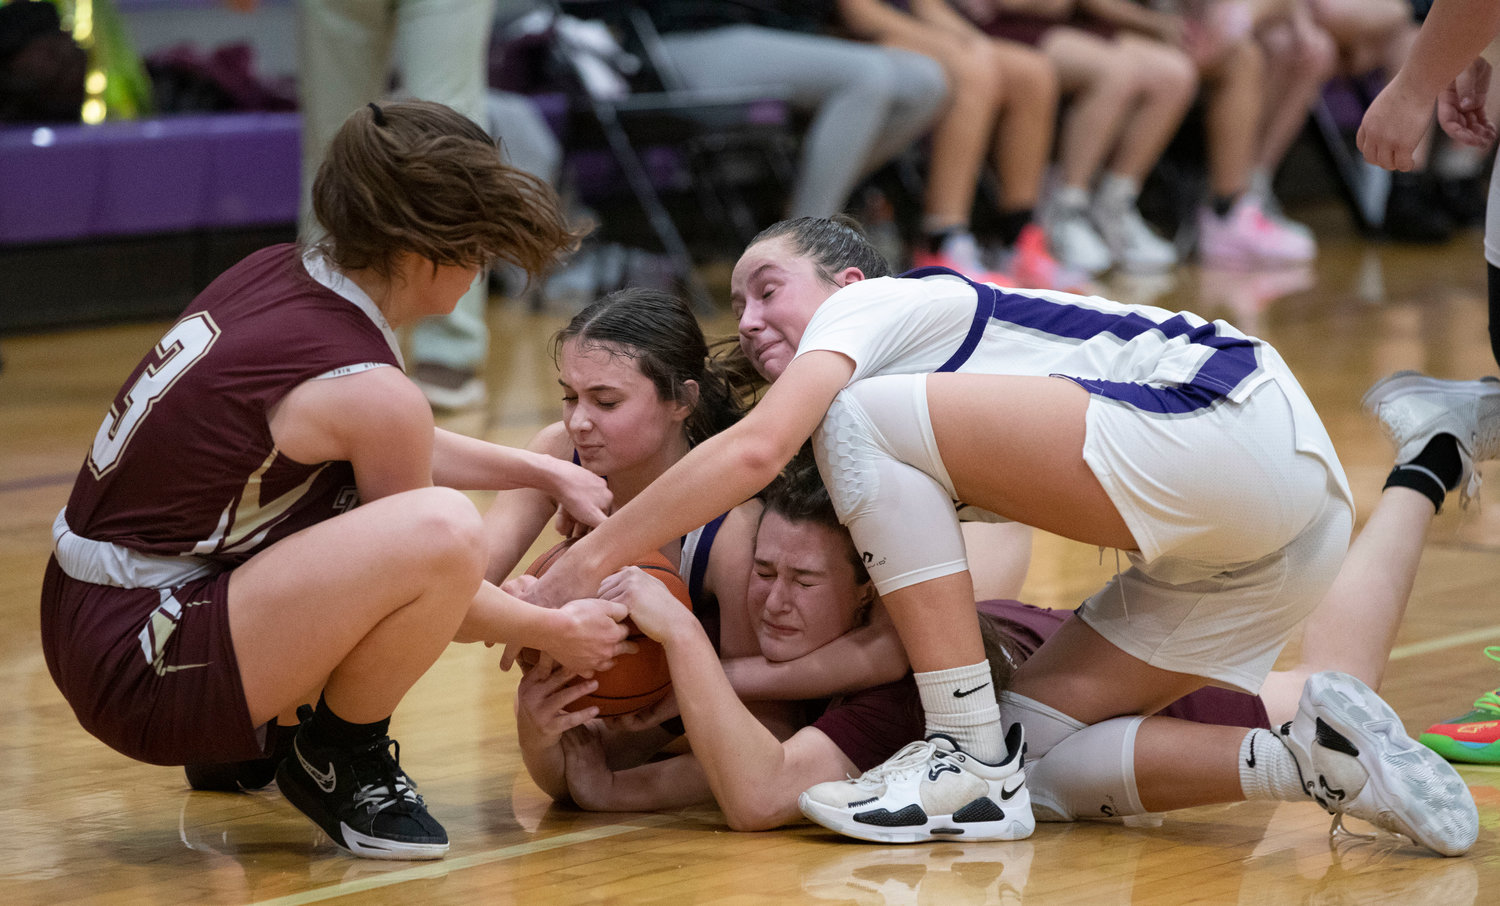 Tiverton guard Ellery Pacheco (left) tugs at the ball to help teammate Abbie Monkevicz (middle), while Huskies guard Maddy Butterworth and Reyn Ferris try to wrestle it away from her.